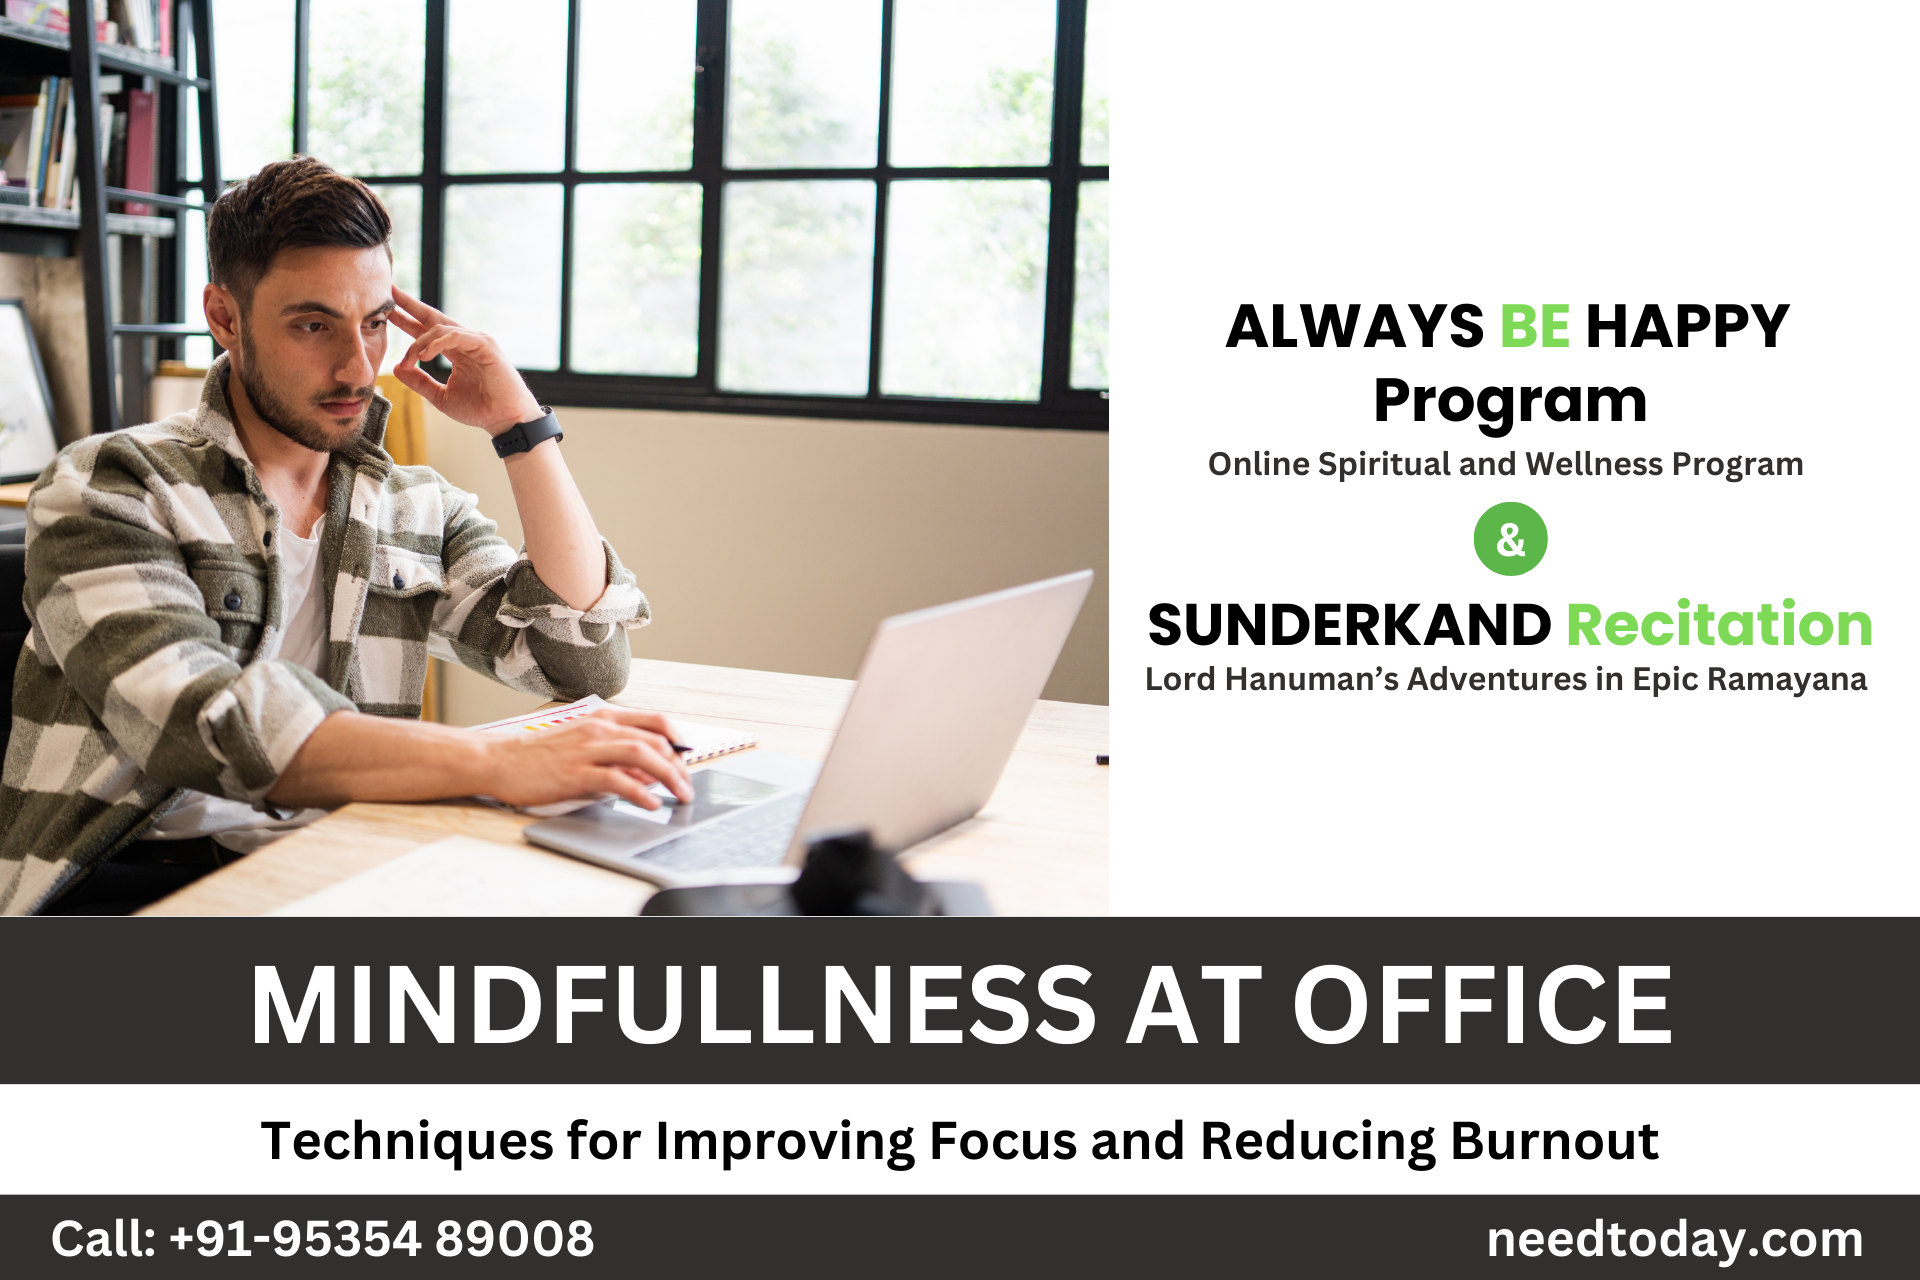 Mindfulness at the Office: Techniques for Improving Focus and Reducing Burnout